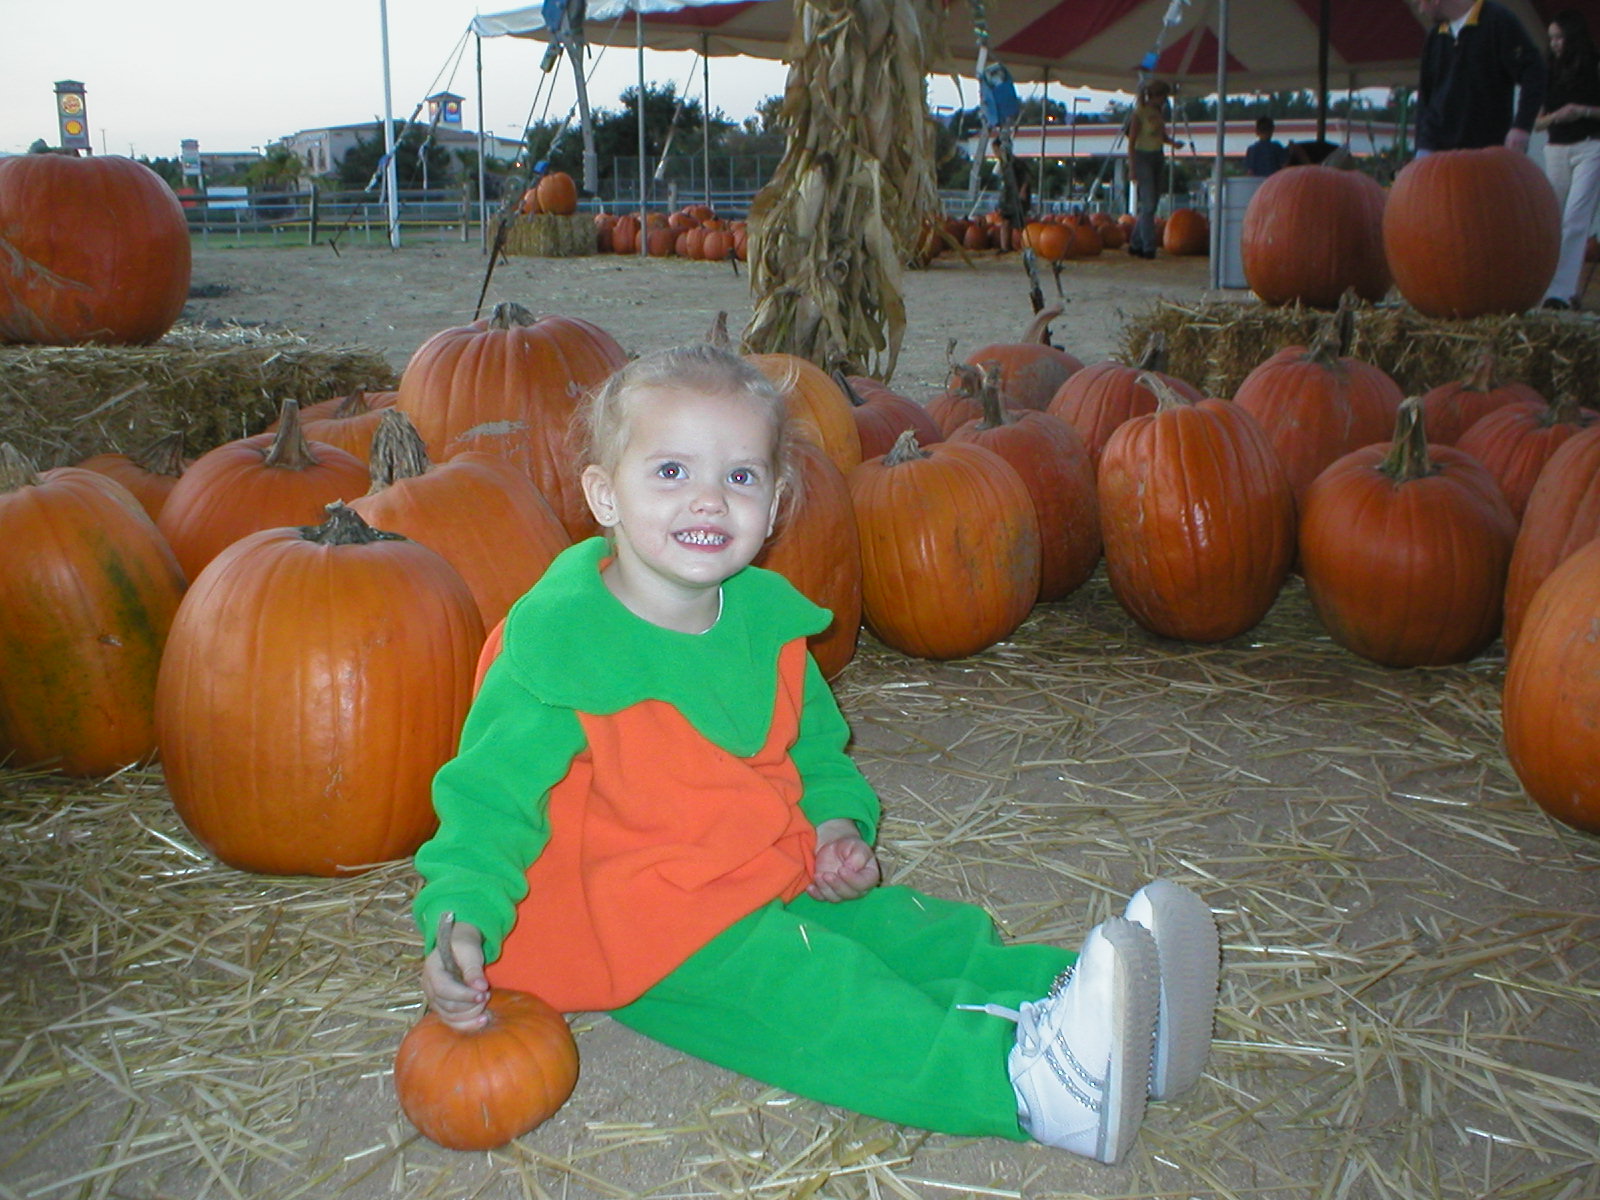 At the "Pumpkin Park" the perfect pumpkin...she carried it around the whole patch.